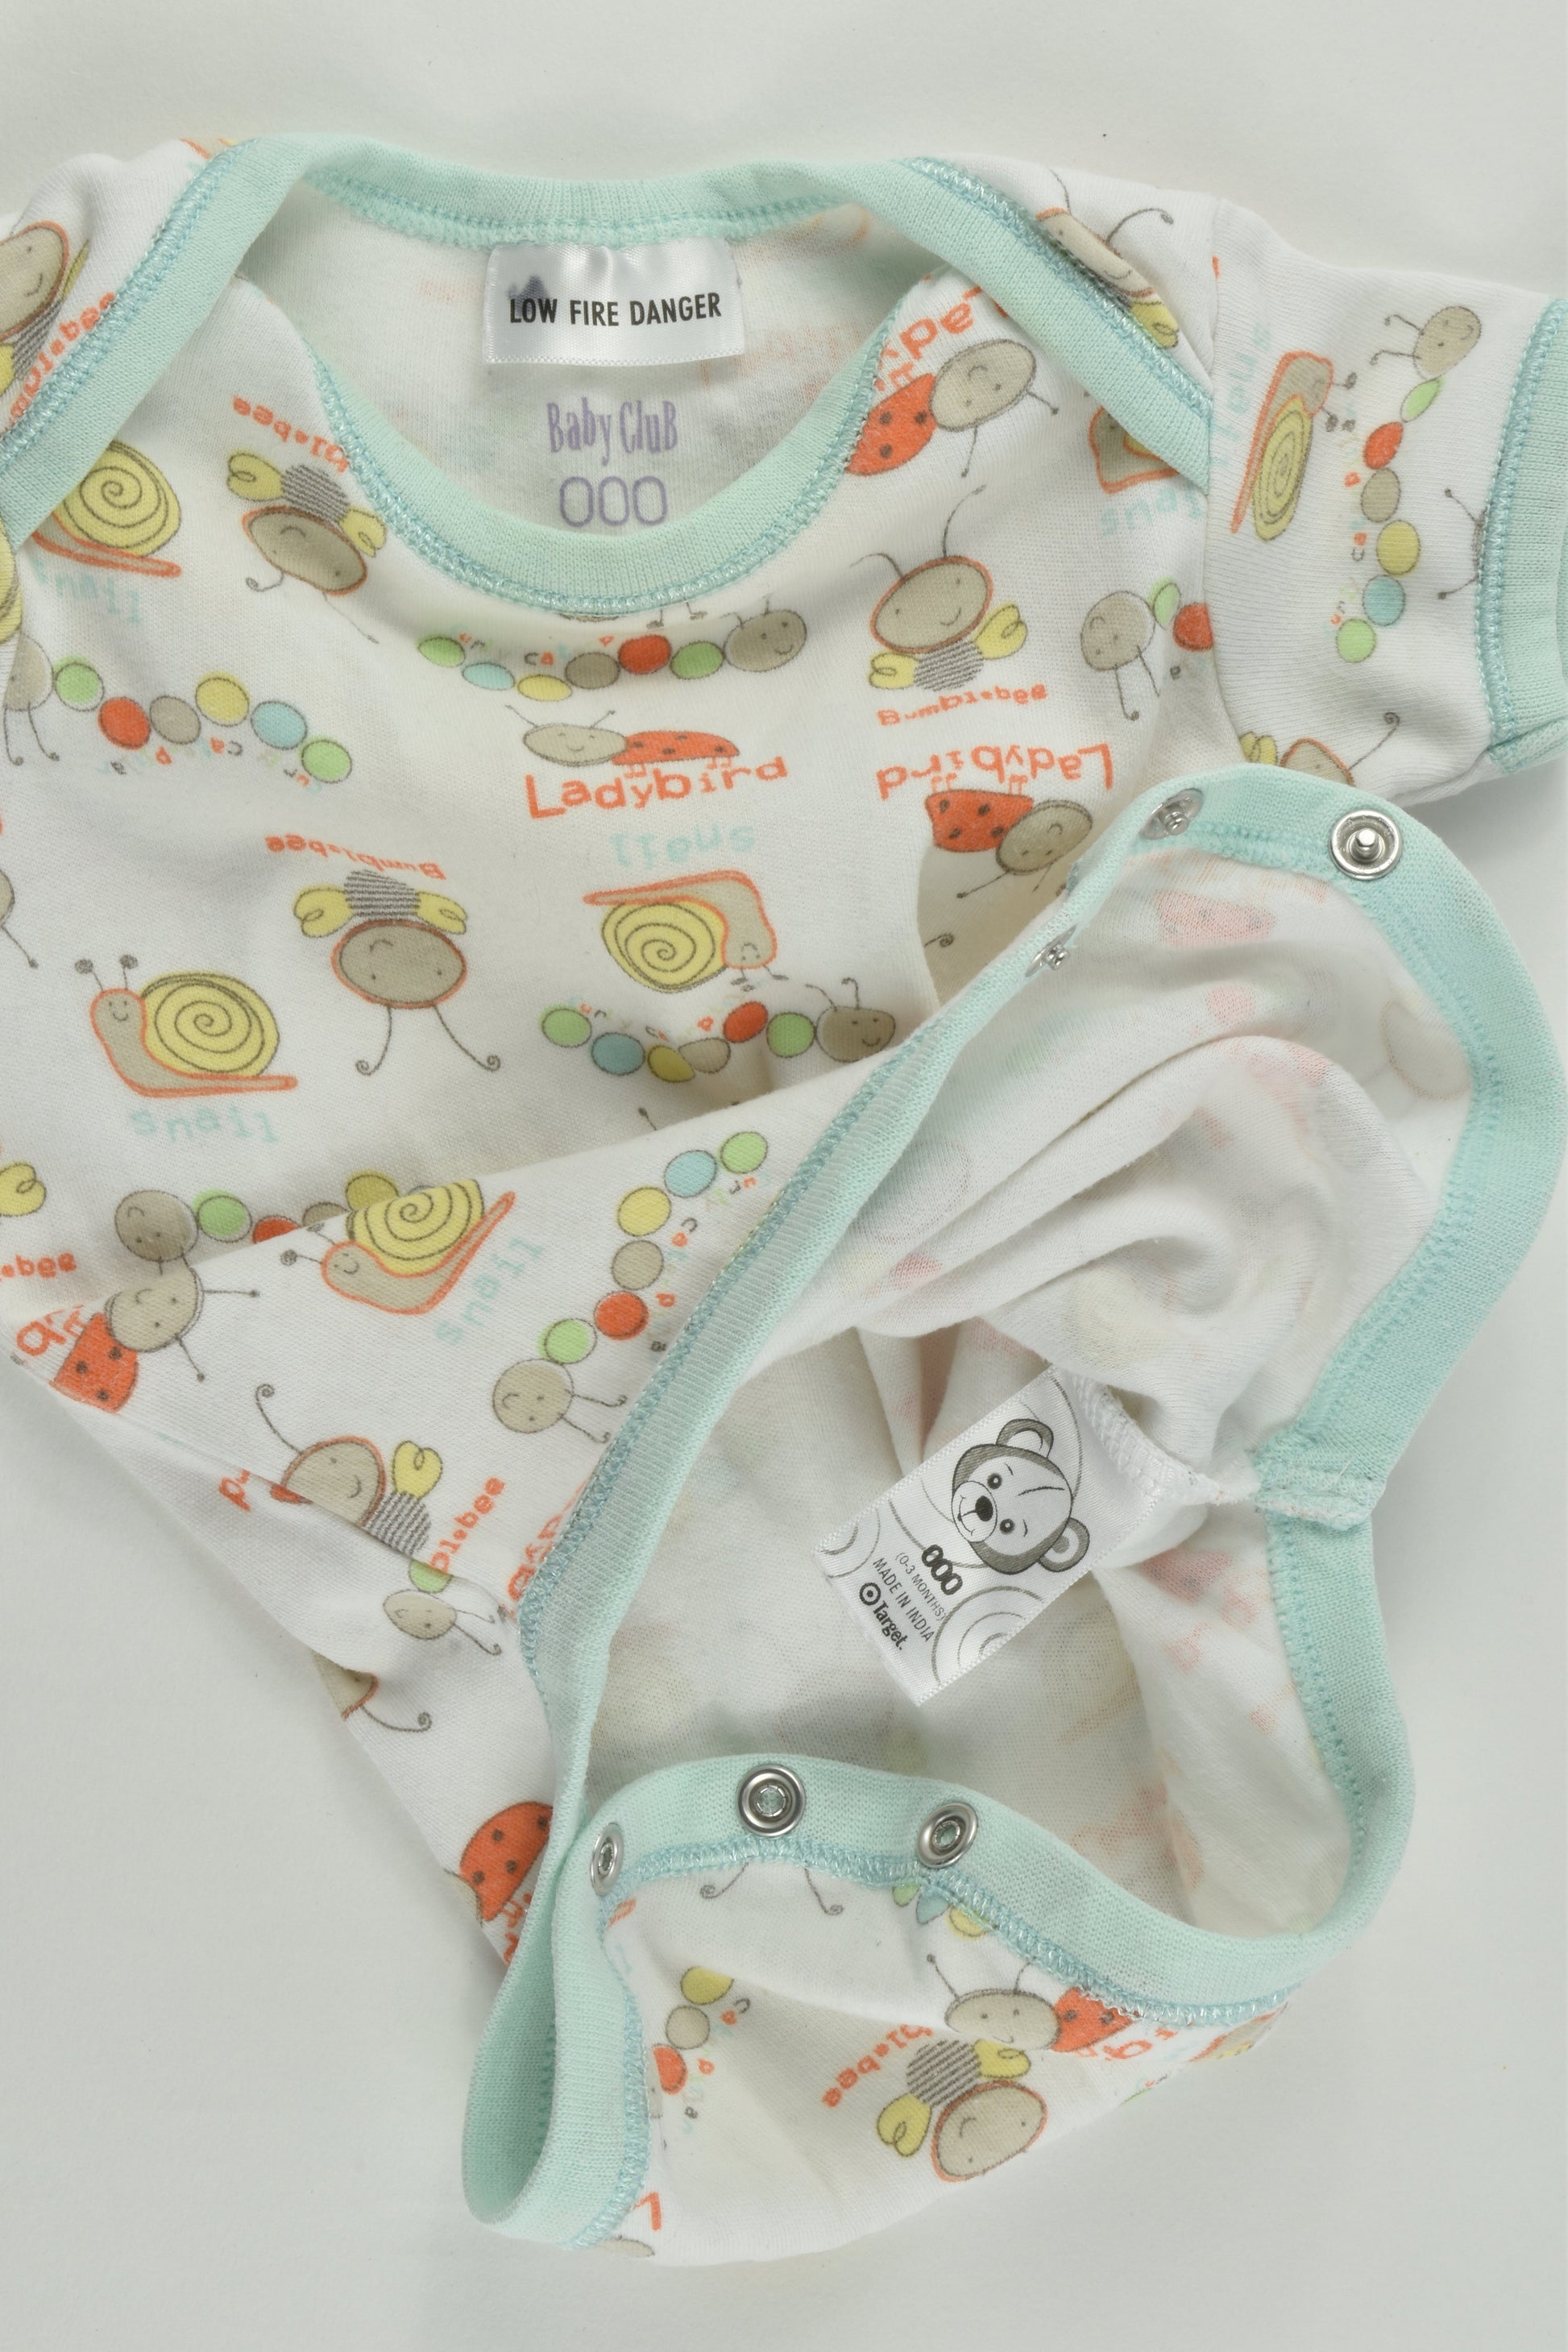 Baby Club Size 000 Bumblebees and Other Animals Bodysuit